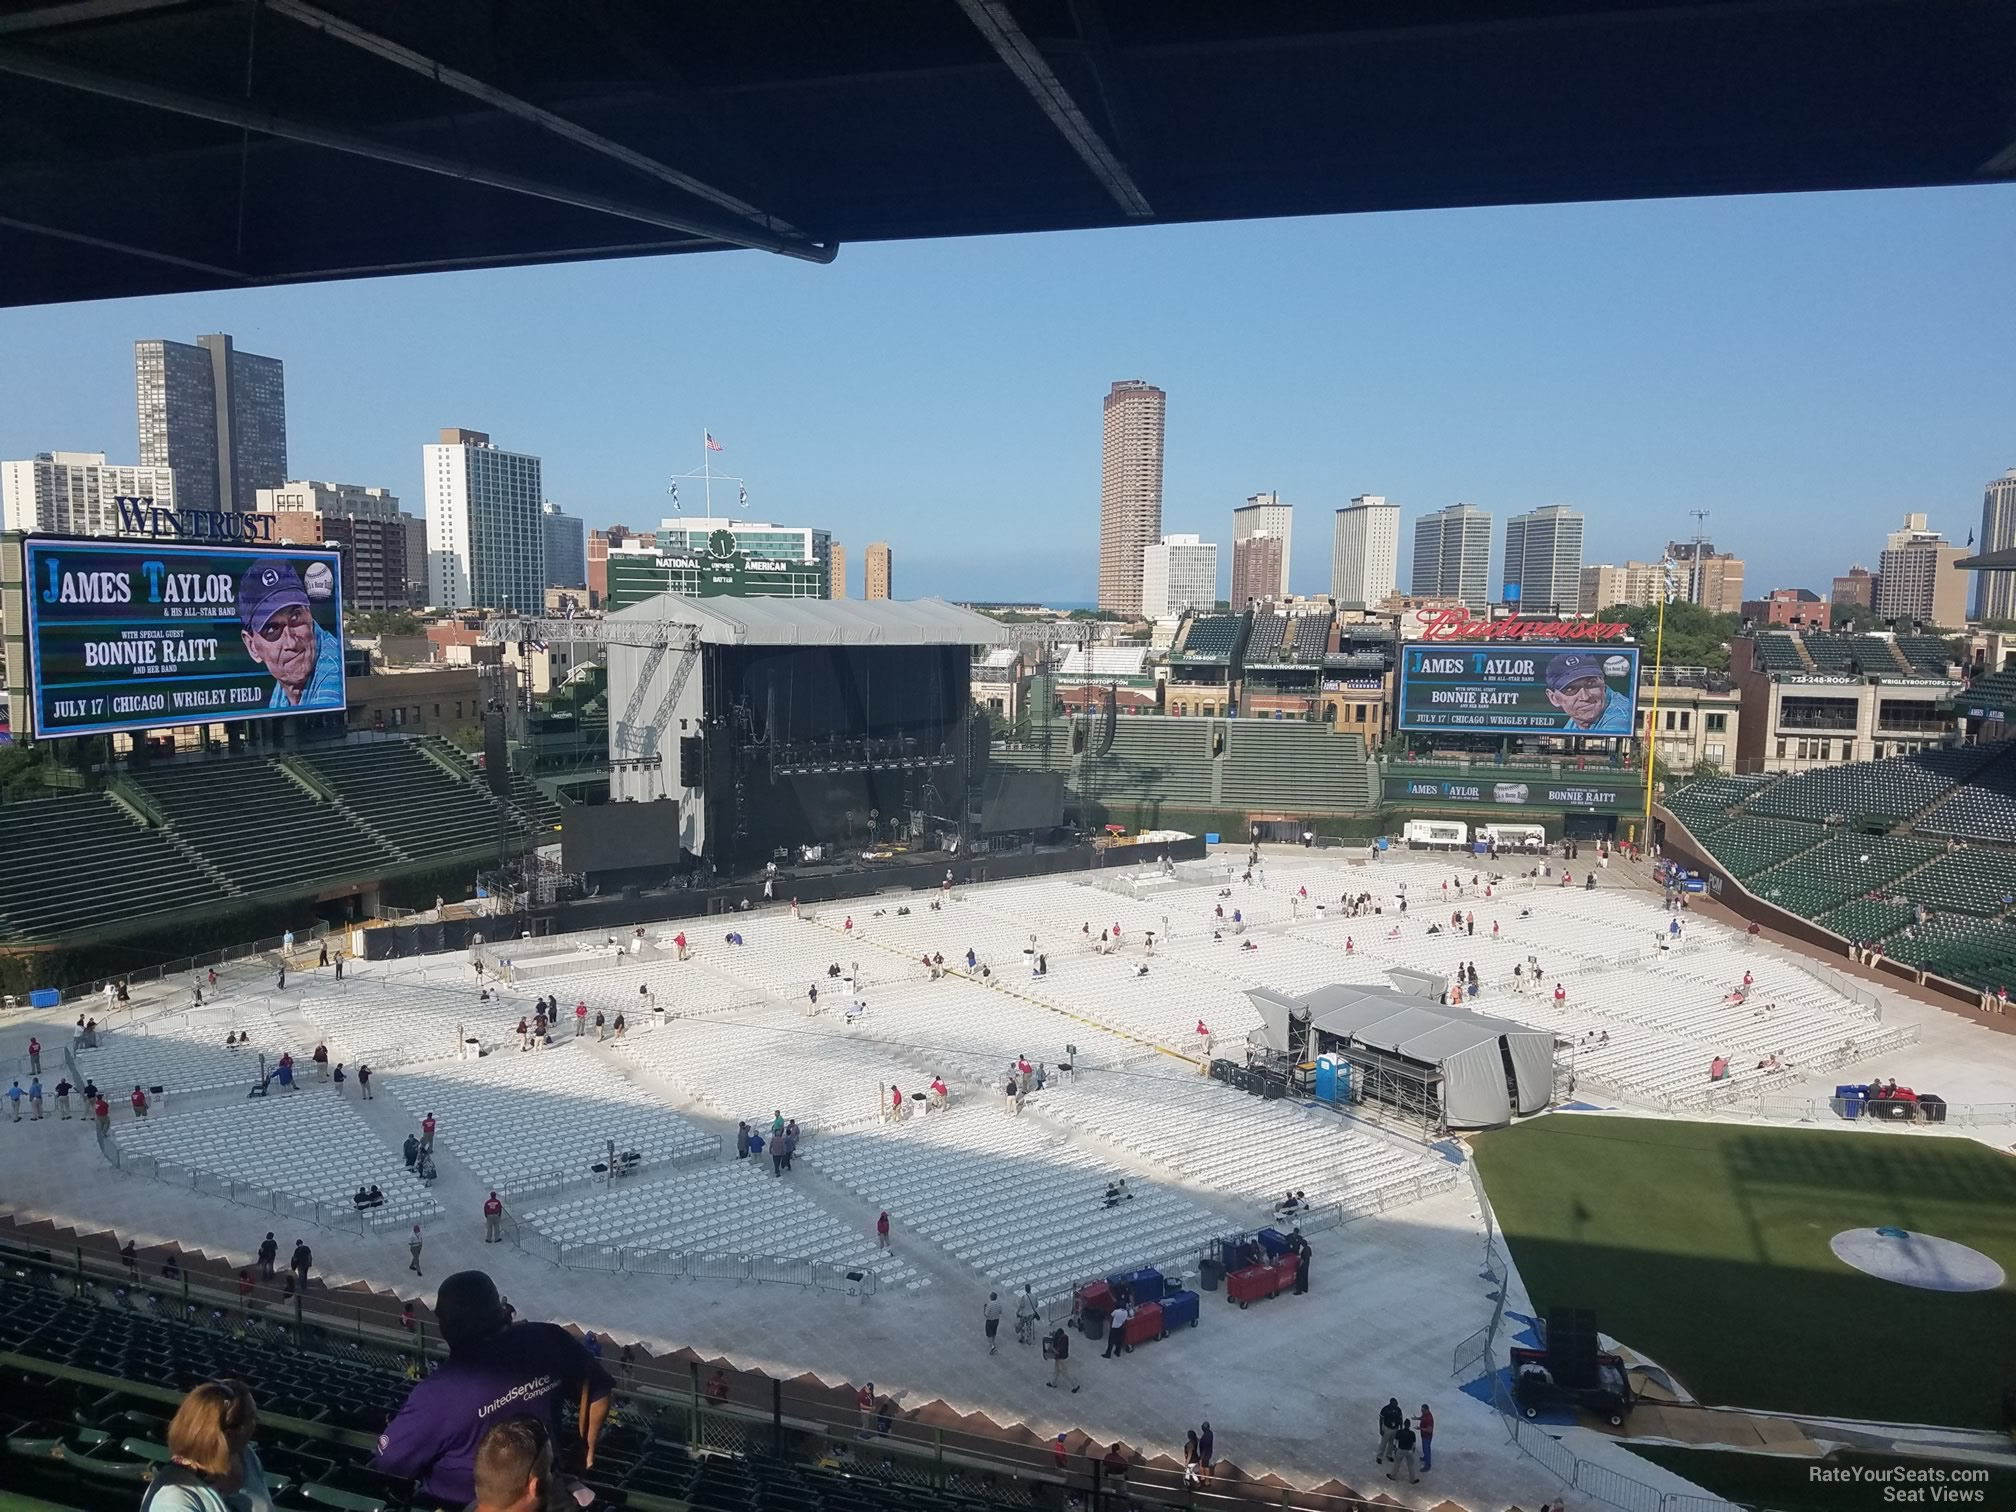 Section 410 at Wrigley Field for Concerts